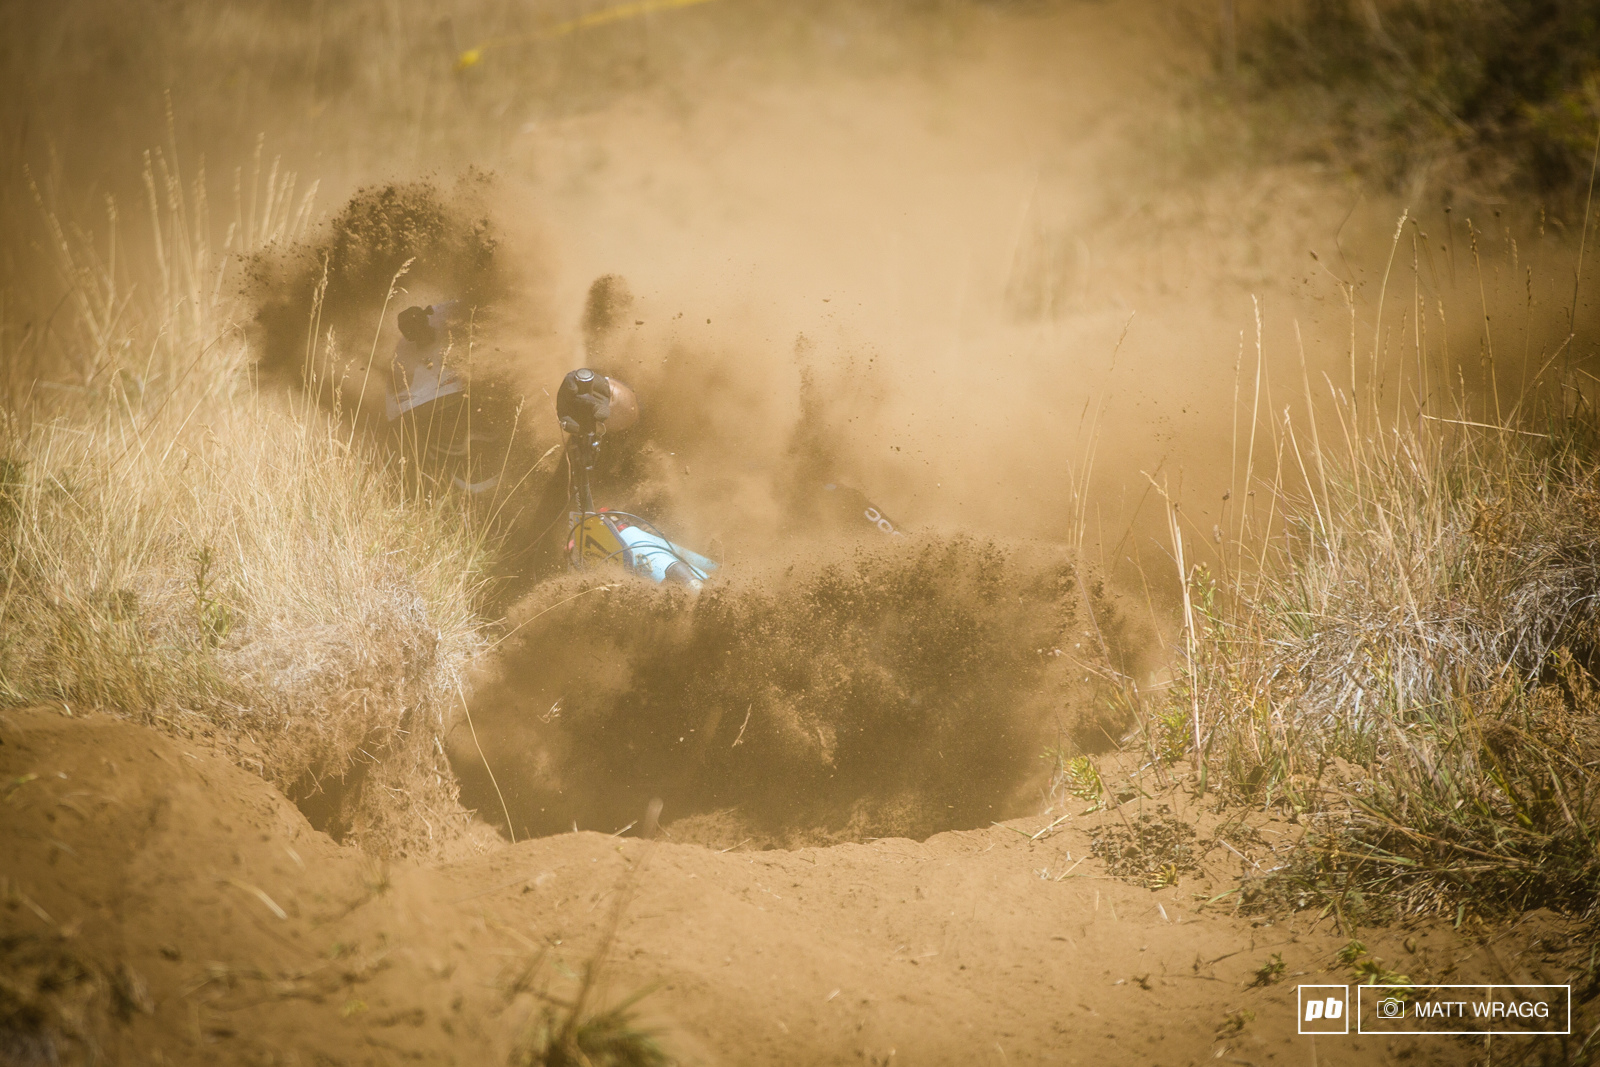 The deep dust could be treacherous though as Robin Wallner found out.